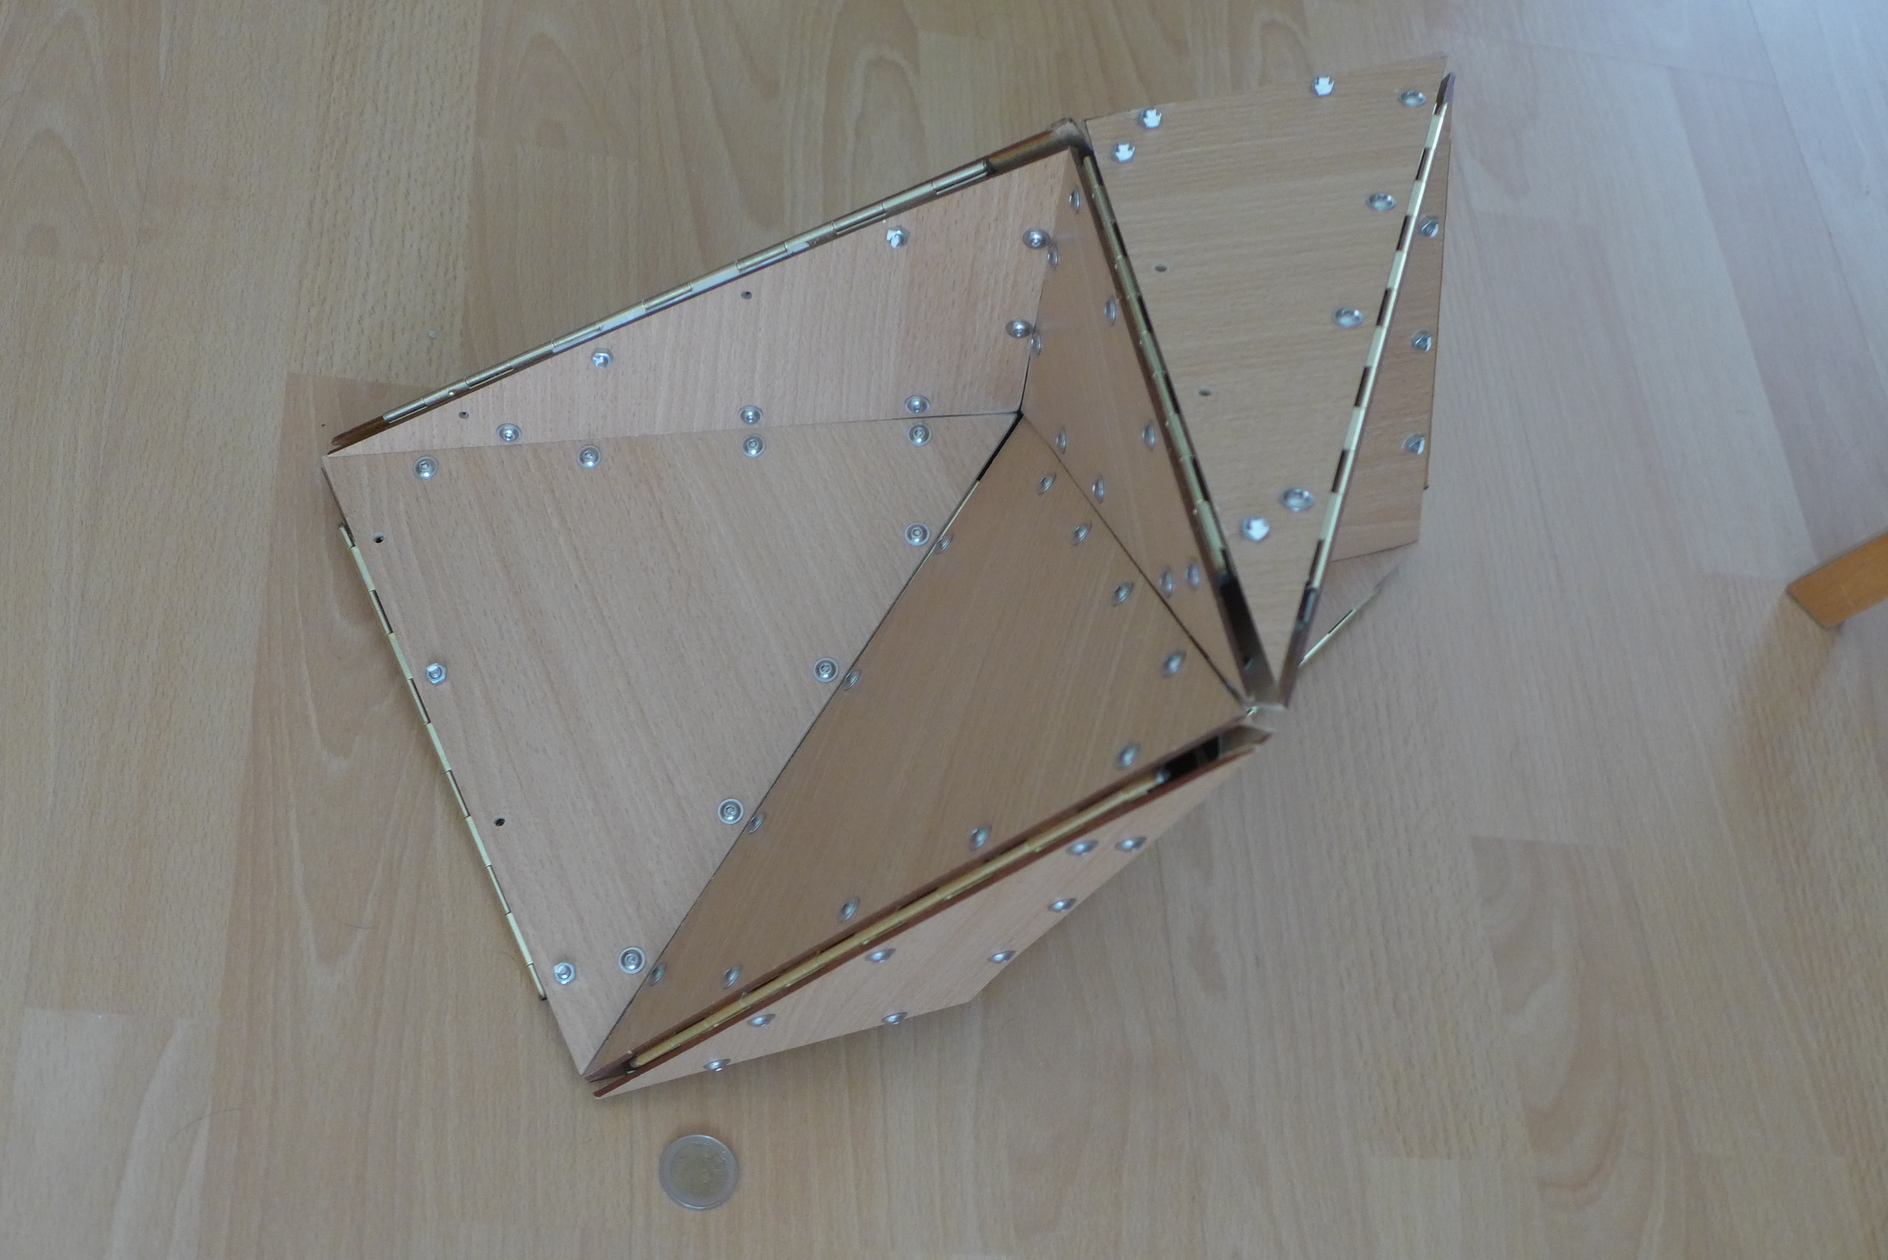 View 2 of the big polyhedron model